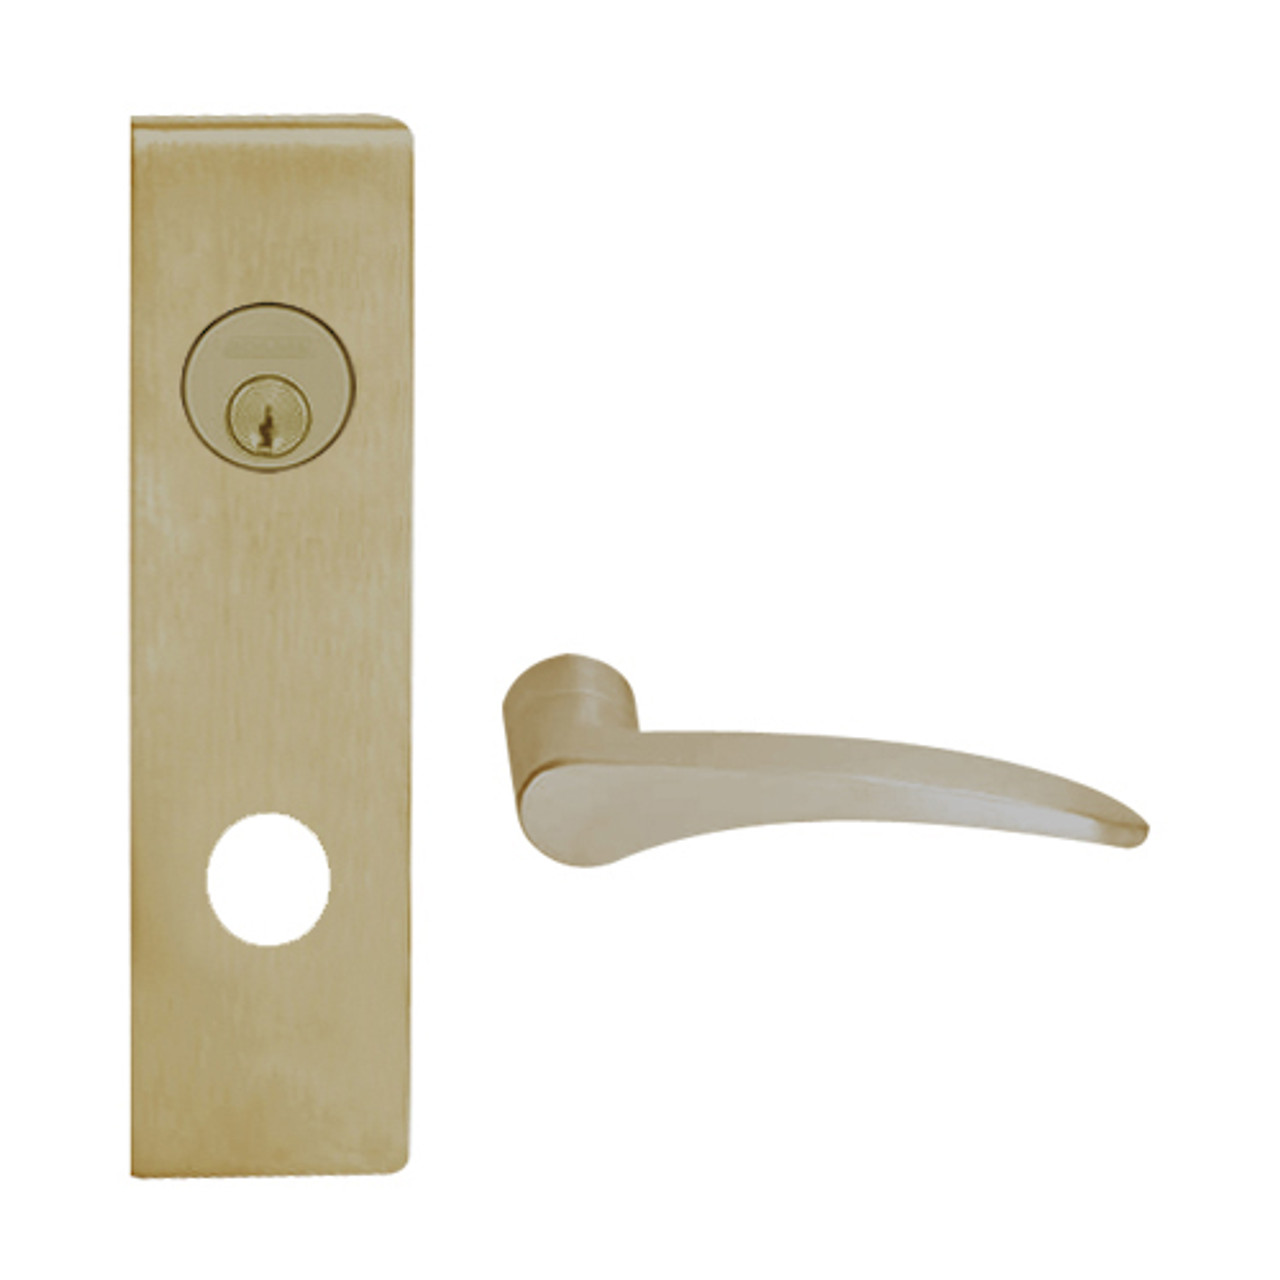 L9453P-12N-613-RH Schlage L Series Entrance with Deadbolt Commercial Mortise Lock with 12 Cast Lever Design in Oil Rubbed Bronze